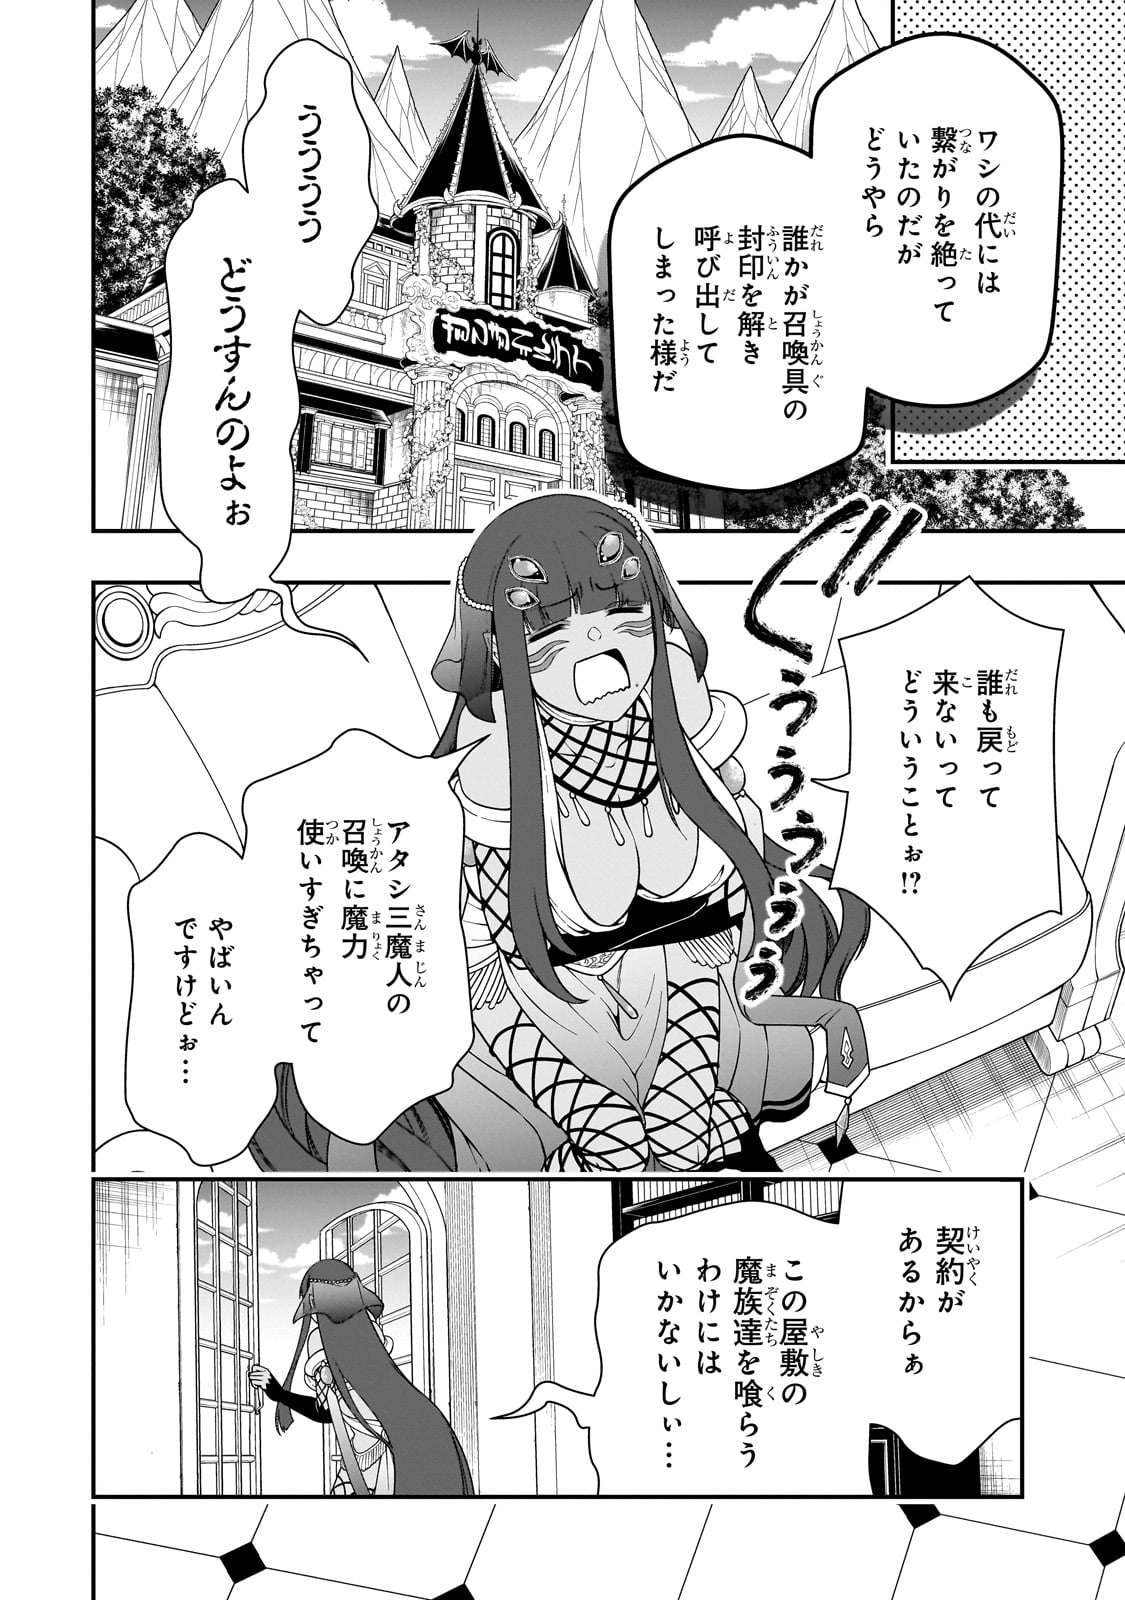 Ex-Hero Candidates, Who Turned Out To Be A Cheat From Lv2, Laid-back Life In Another World - Chapter 51 - Page 28